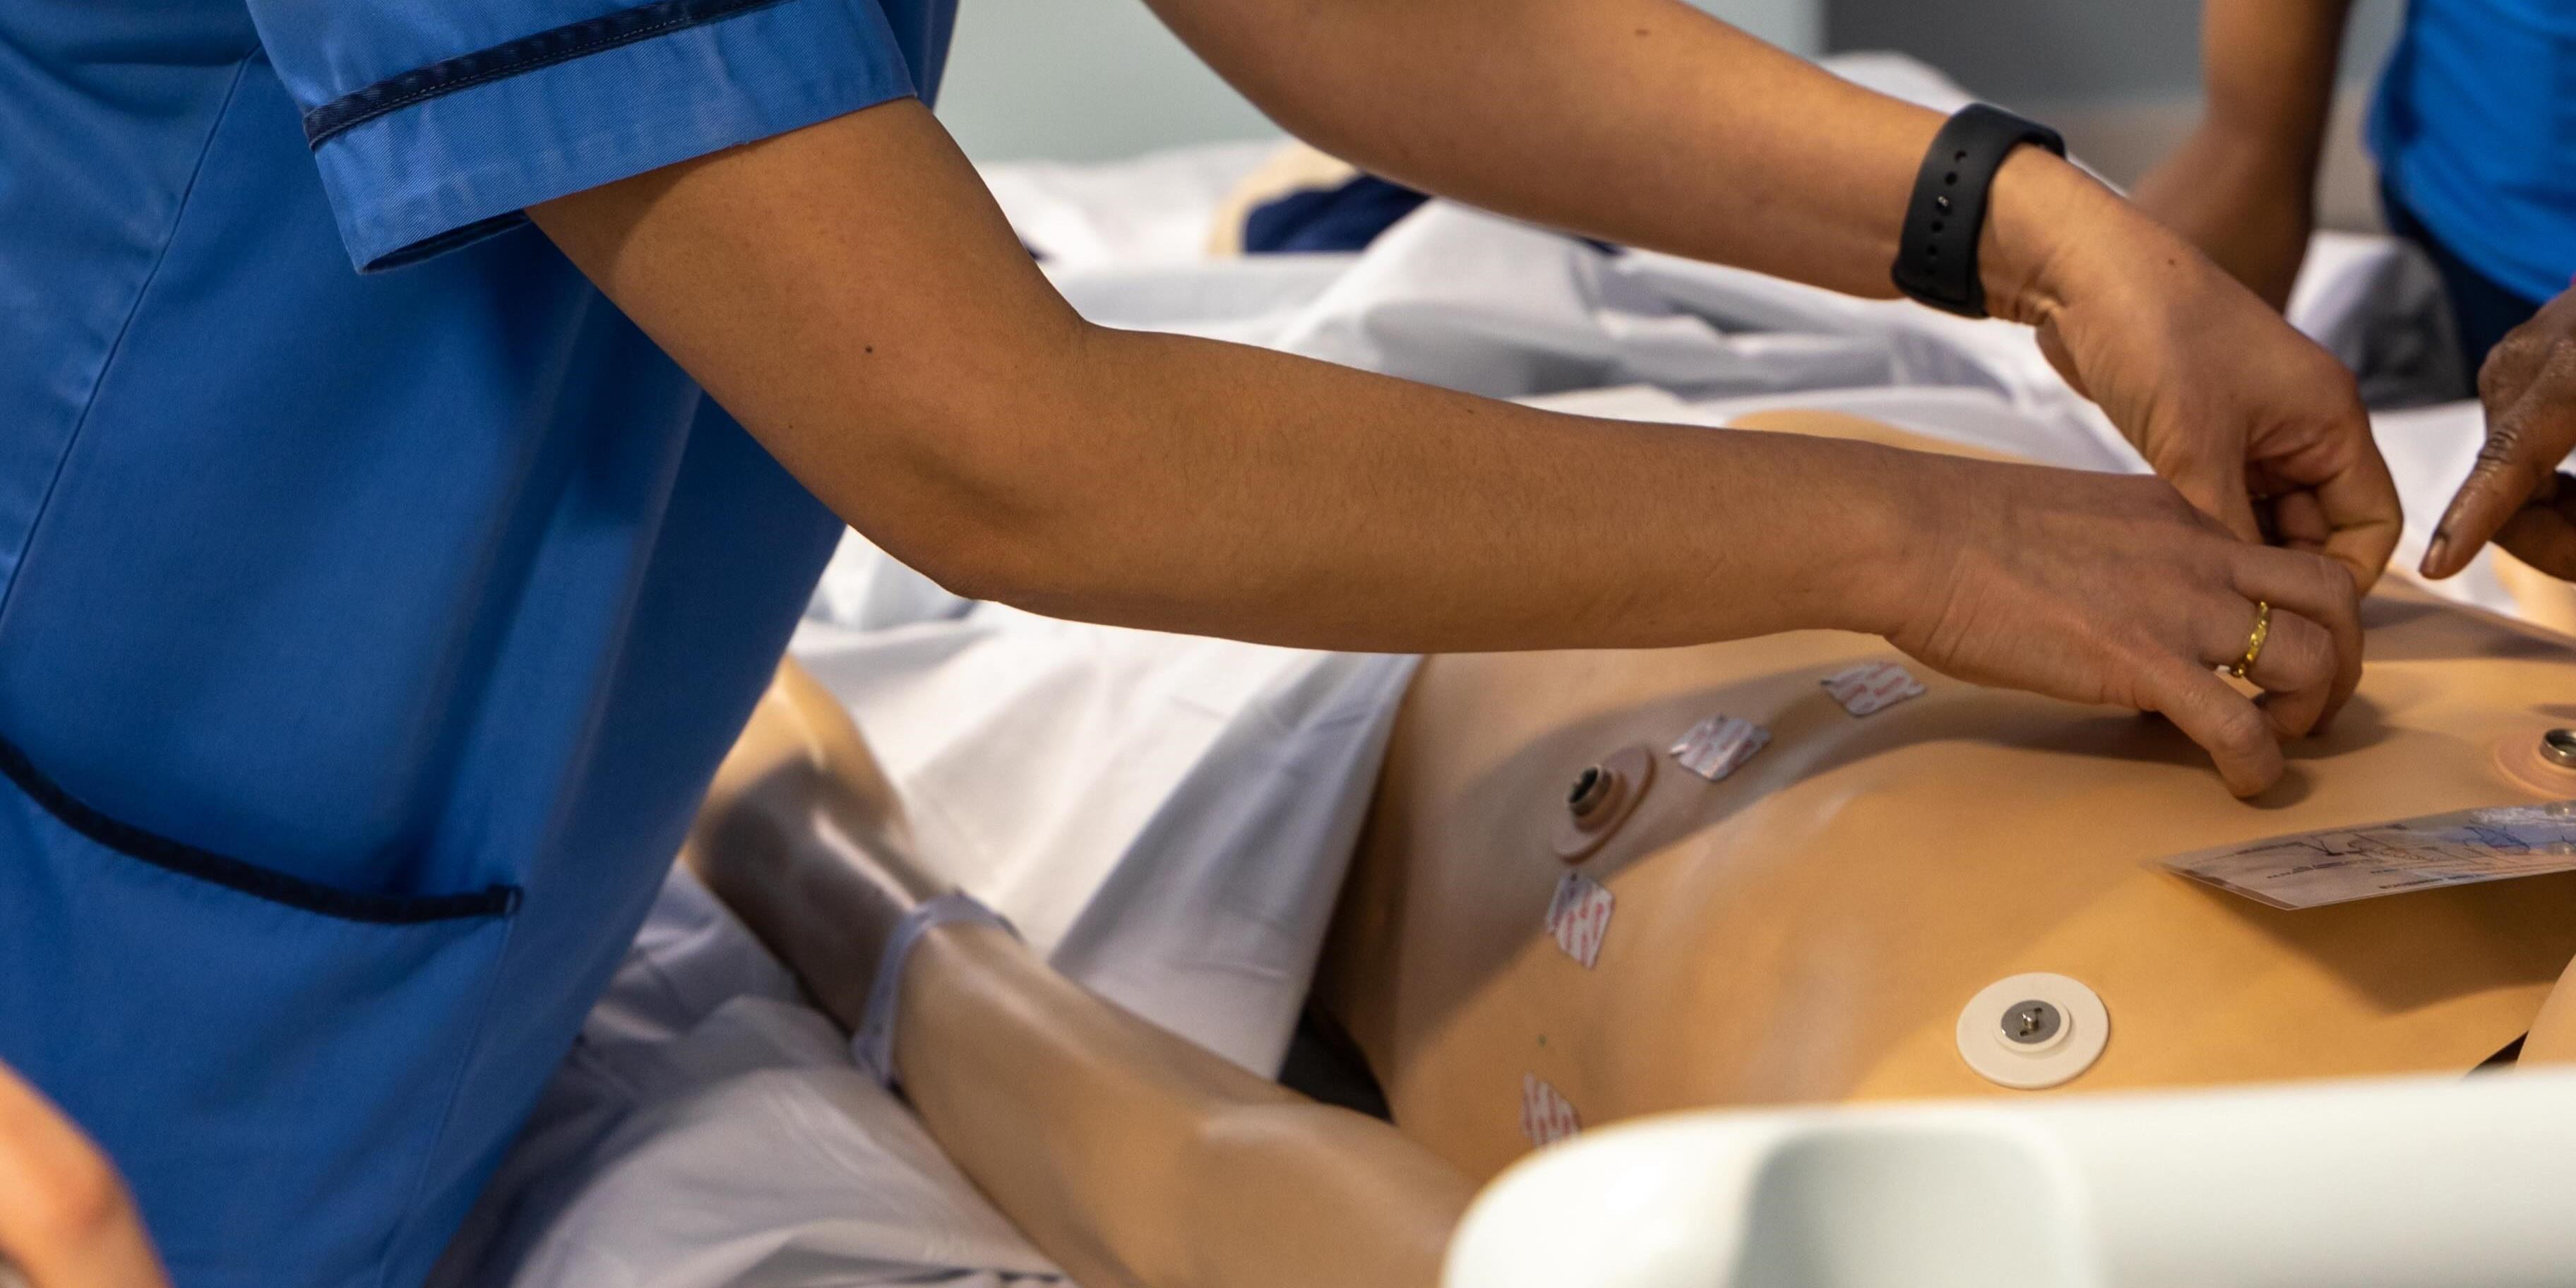 A student practicing the placement of ECG electrodes on a manikin